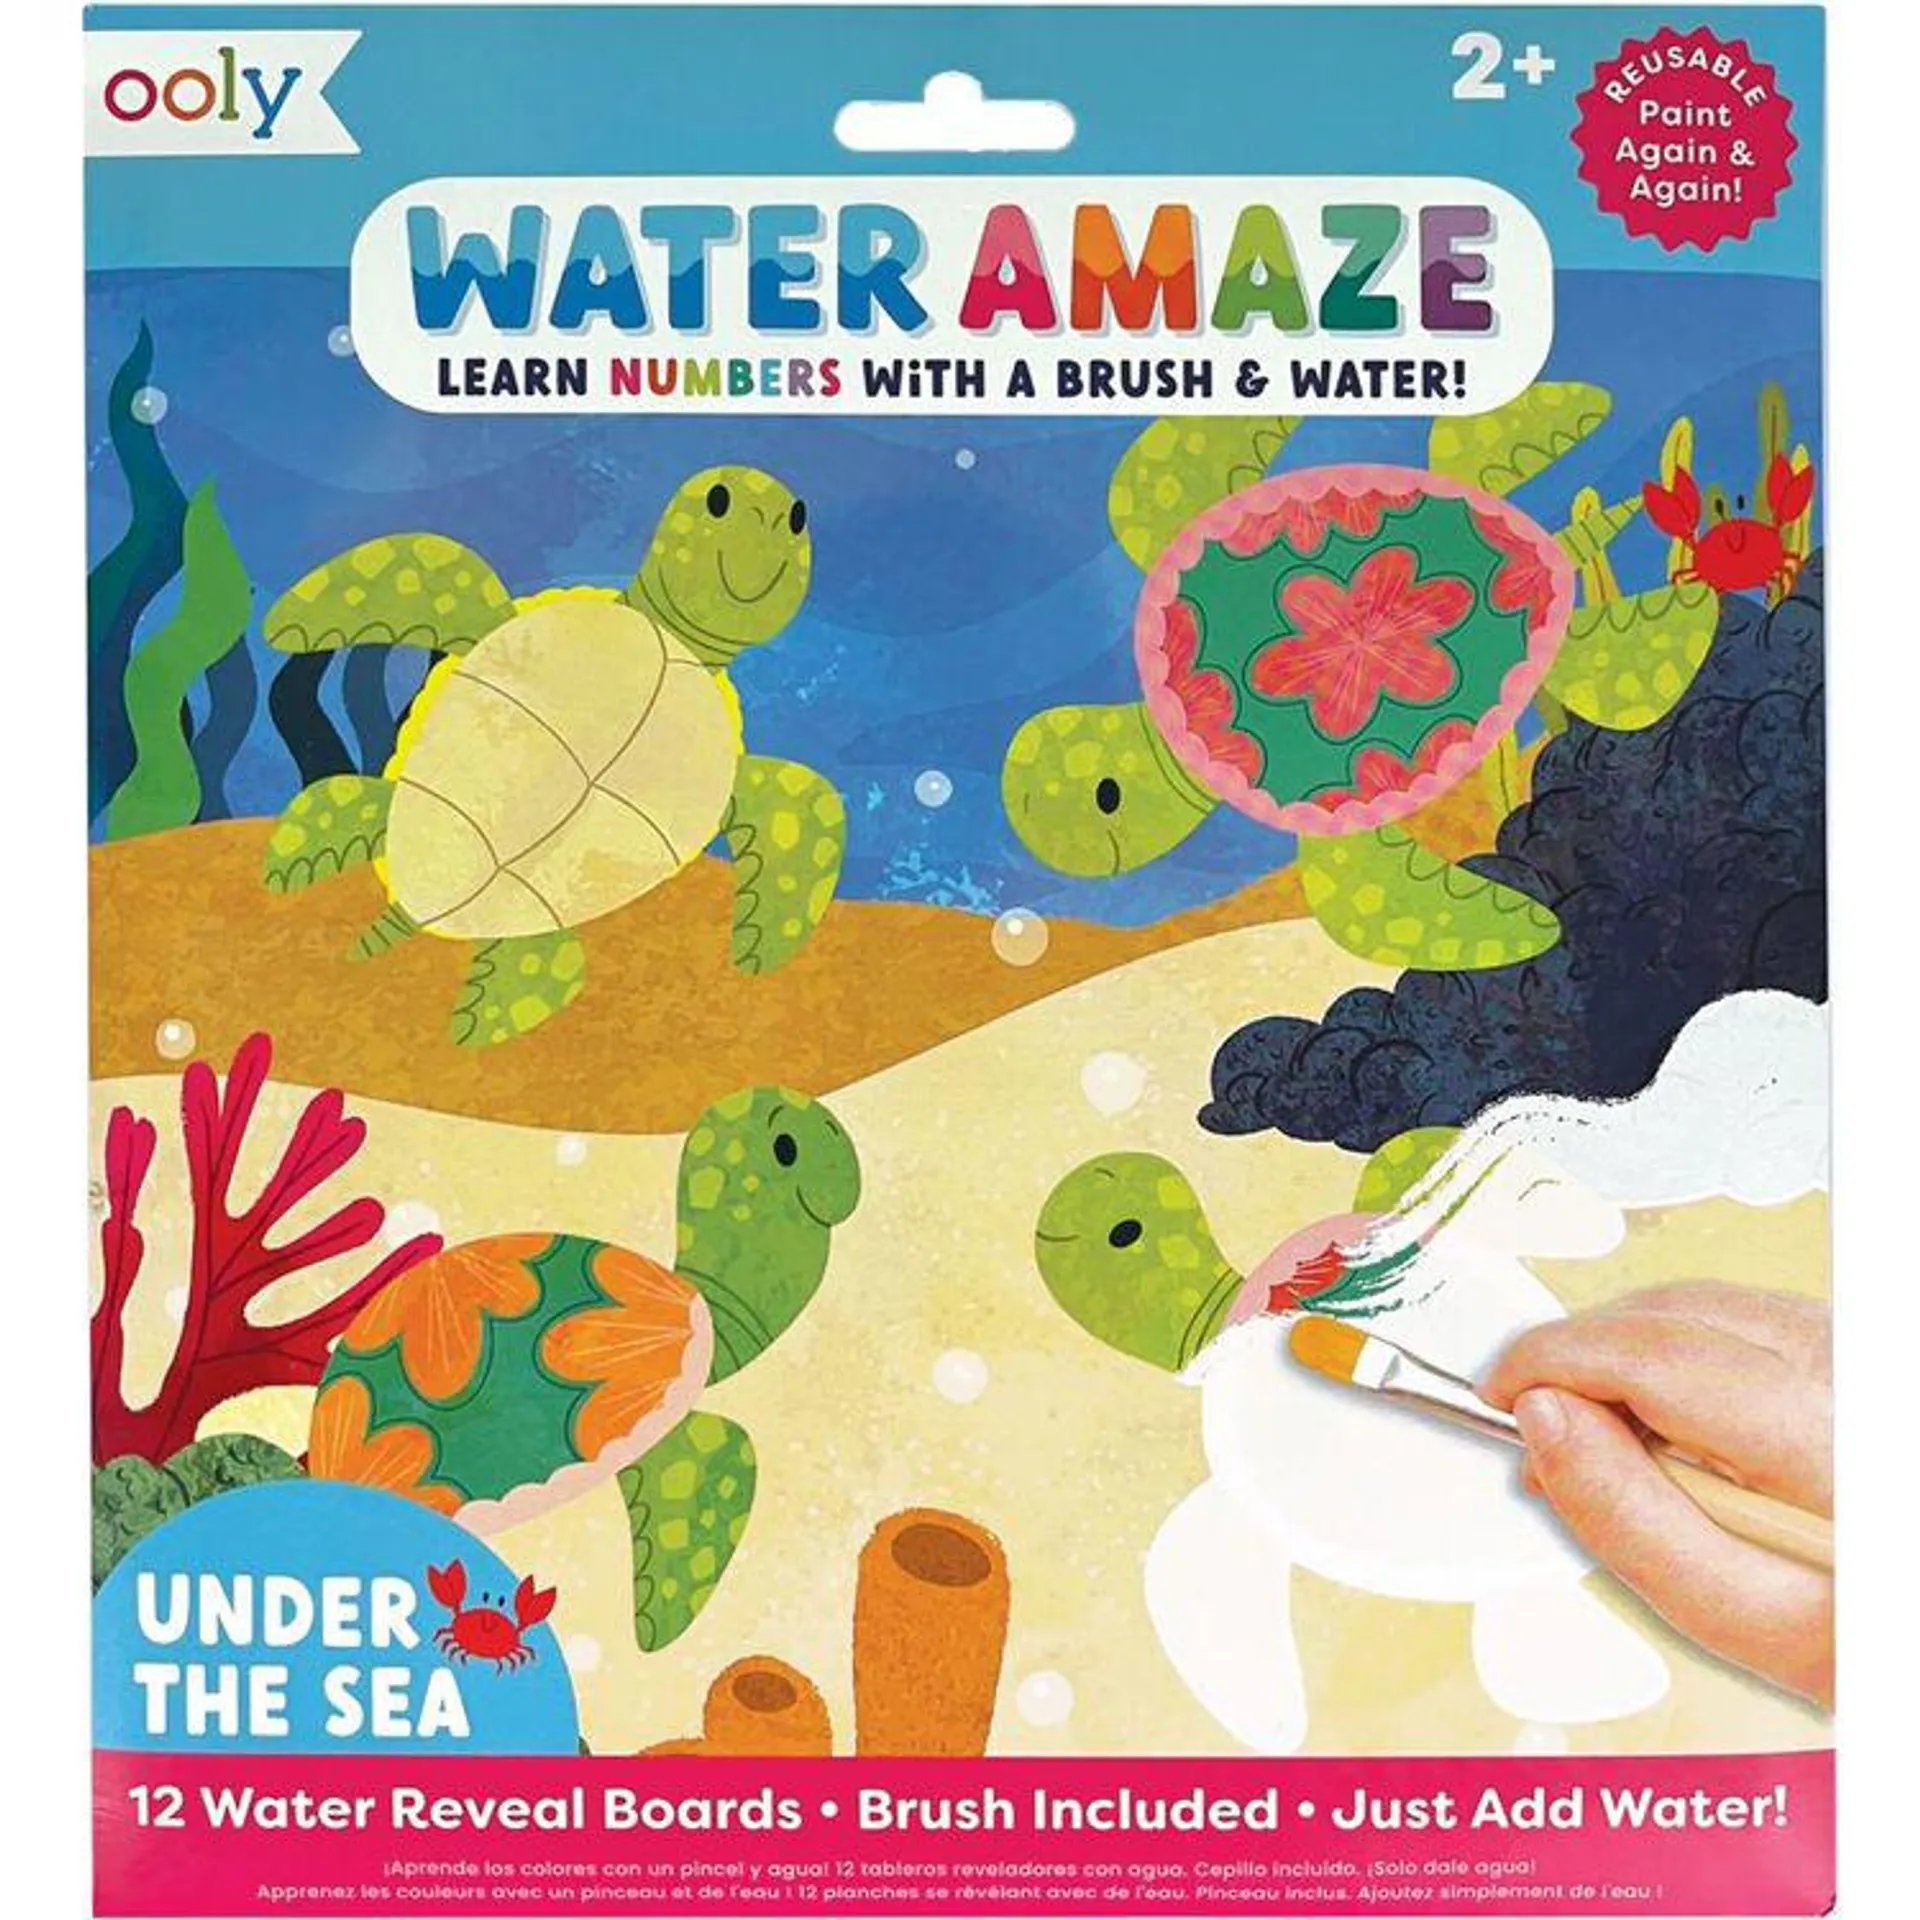 Water Amaze Water Reveal Boards - Under The Sea 13 Piece Set